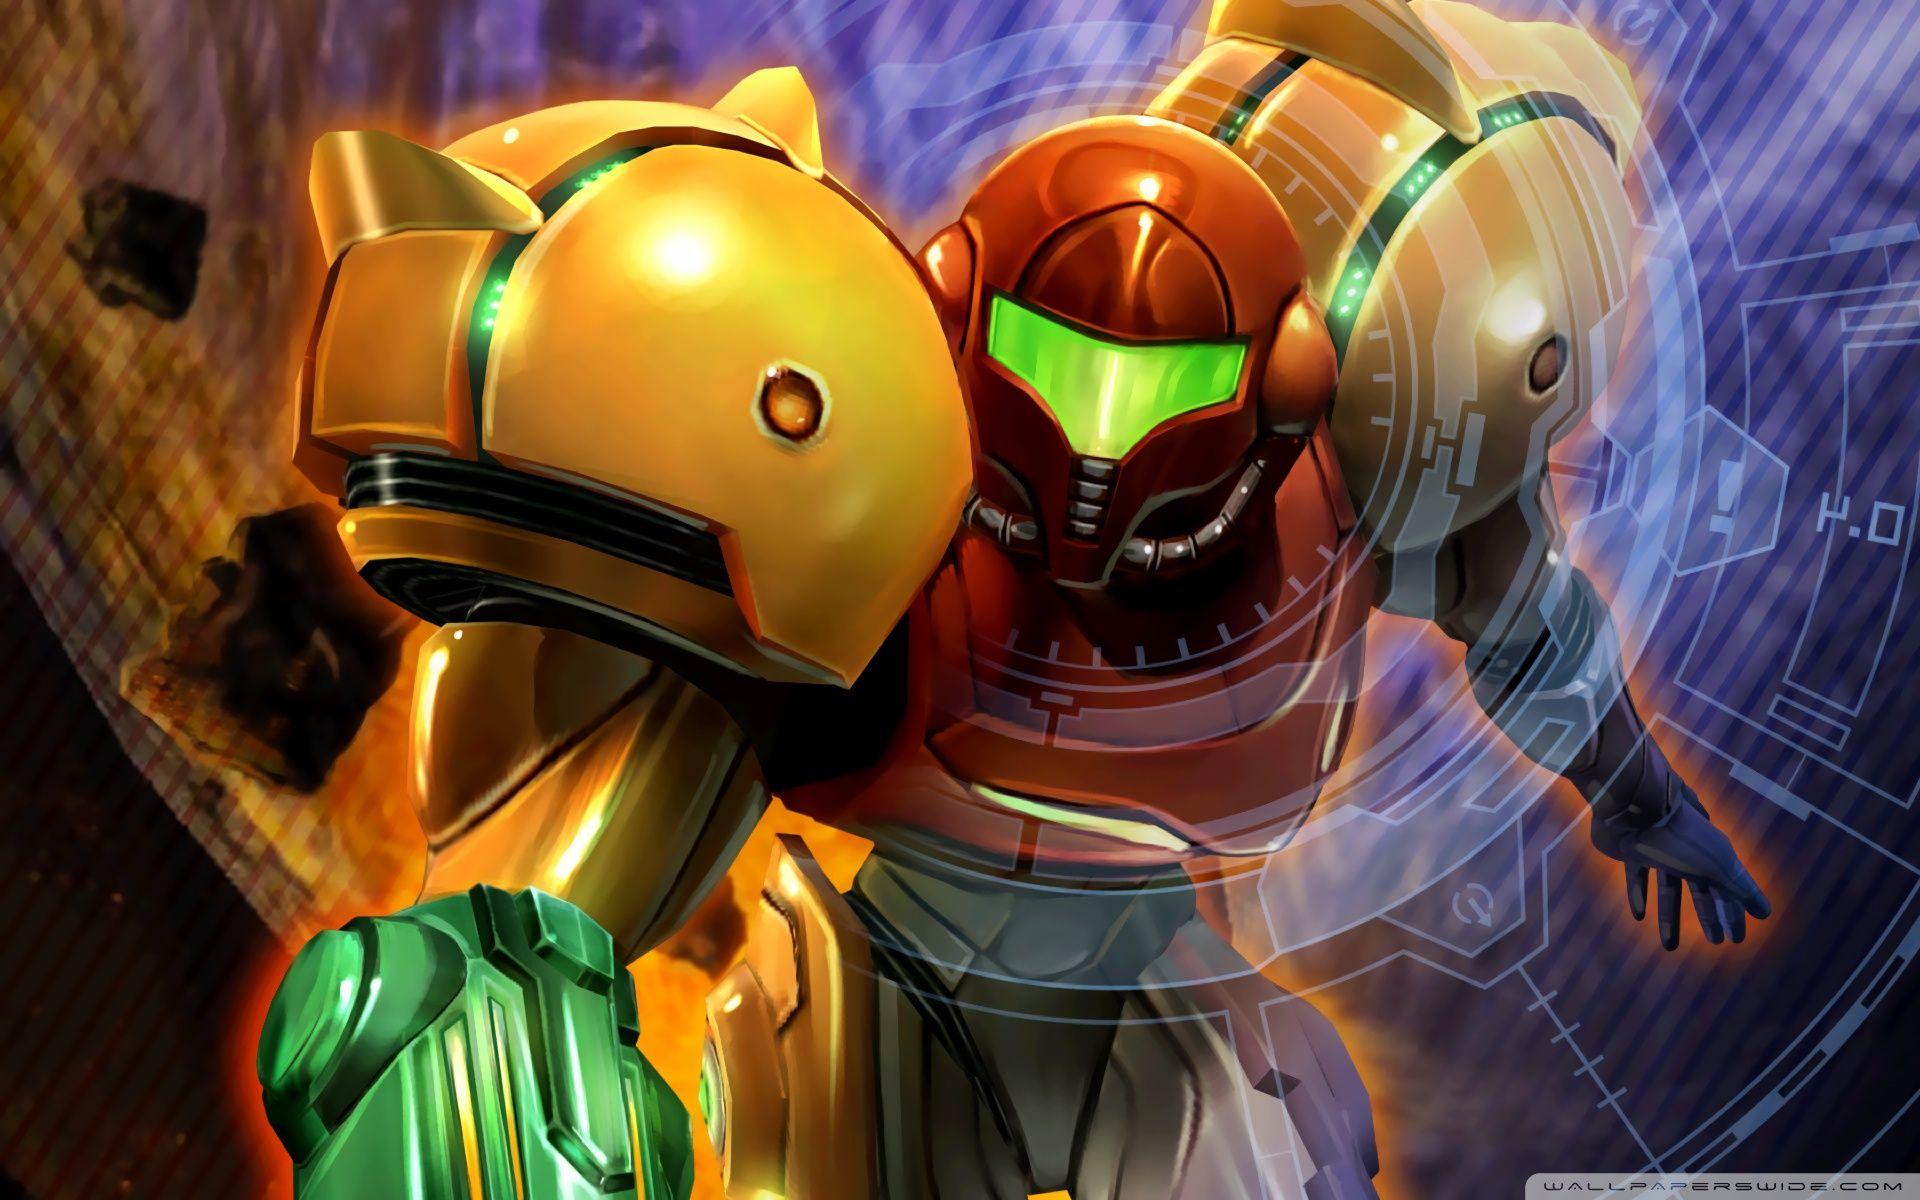 download free metroid other m canon